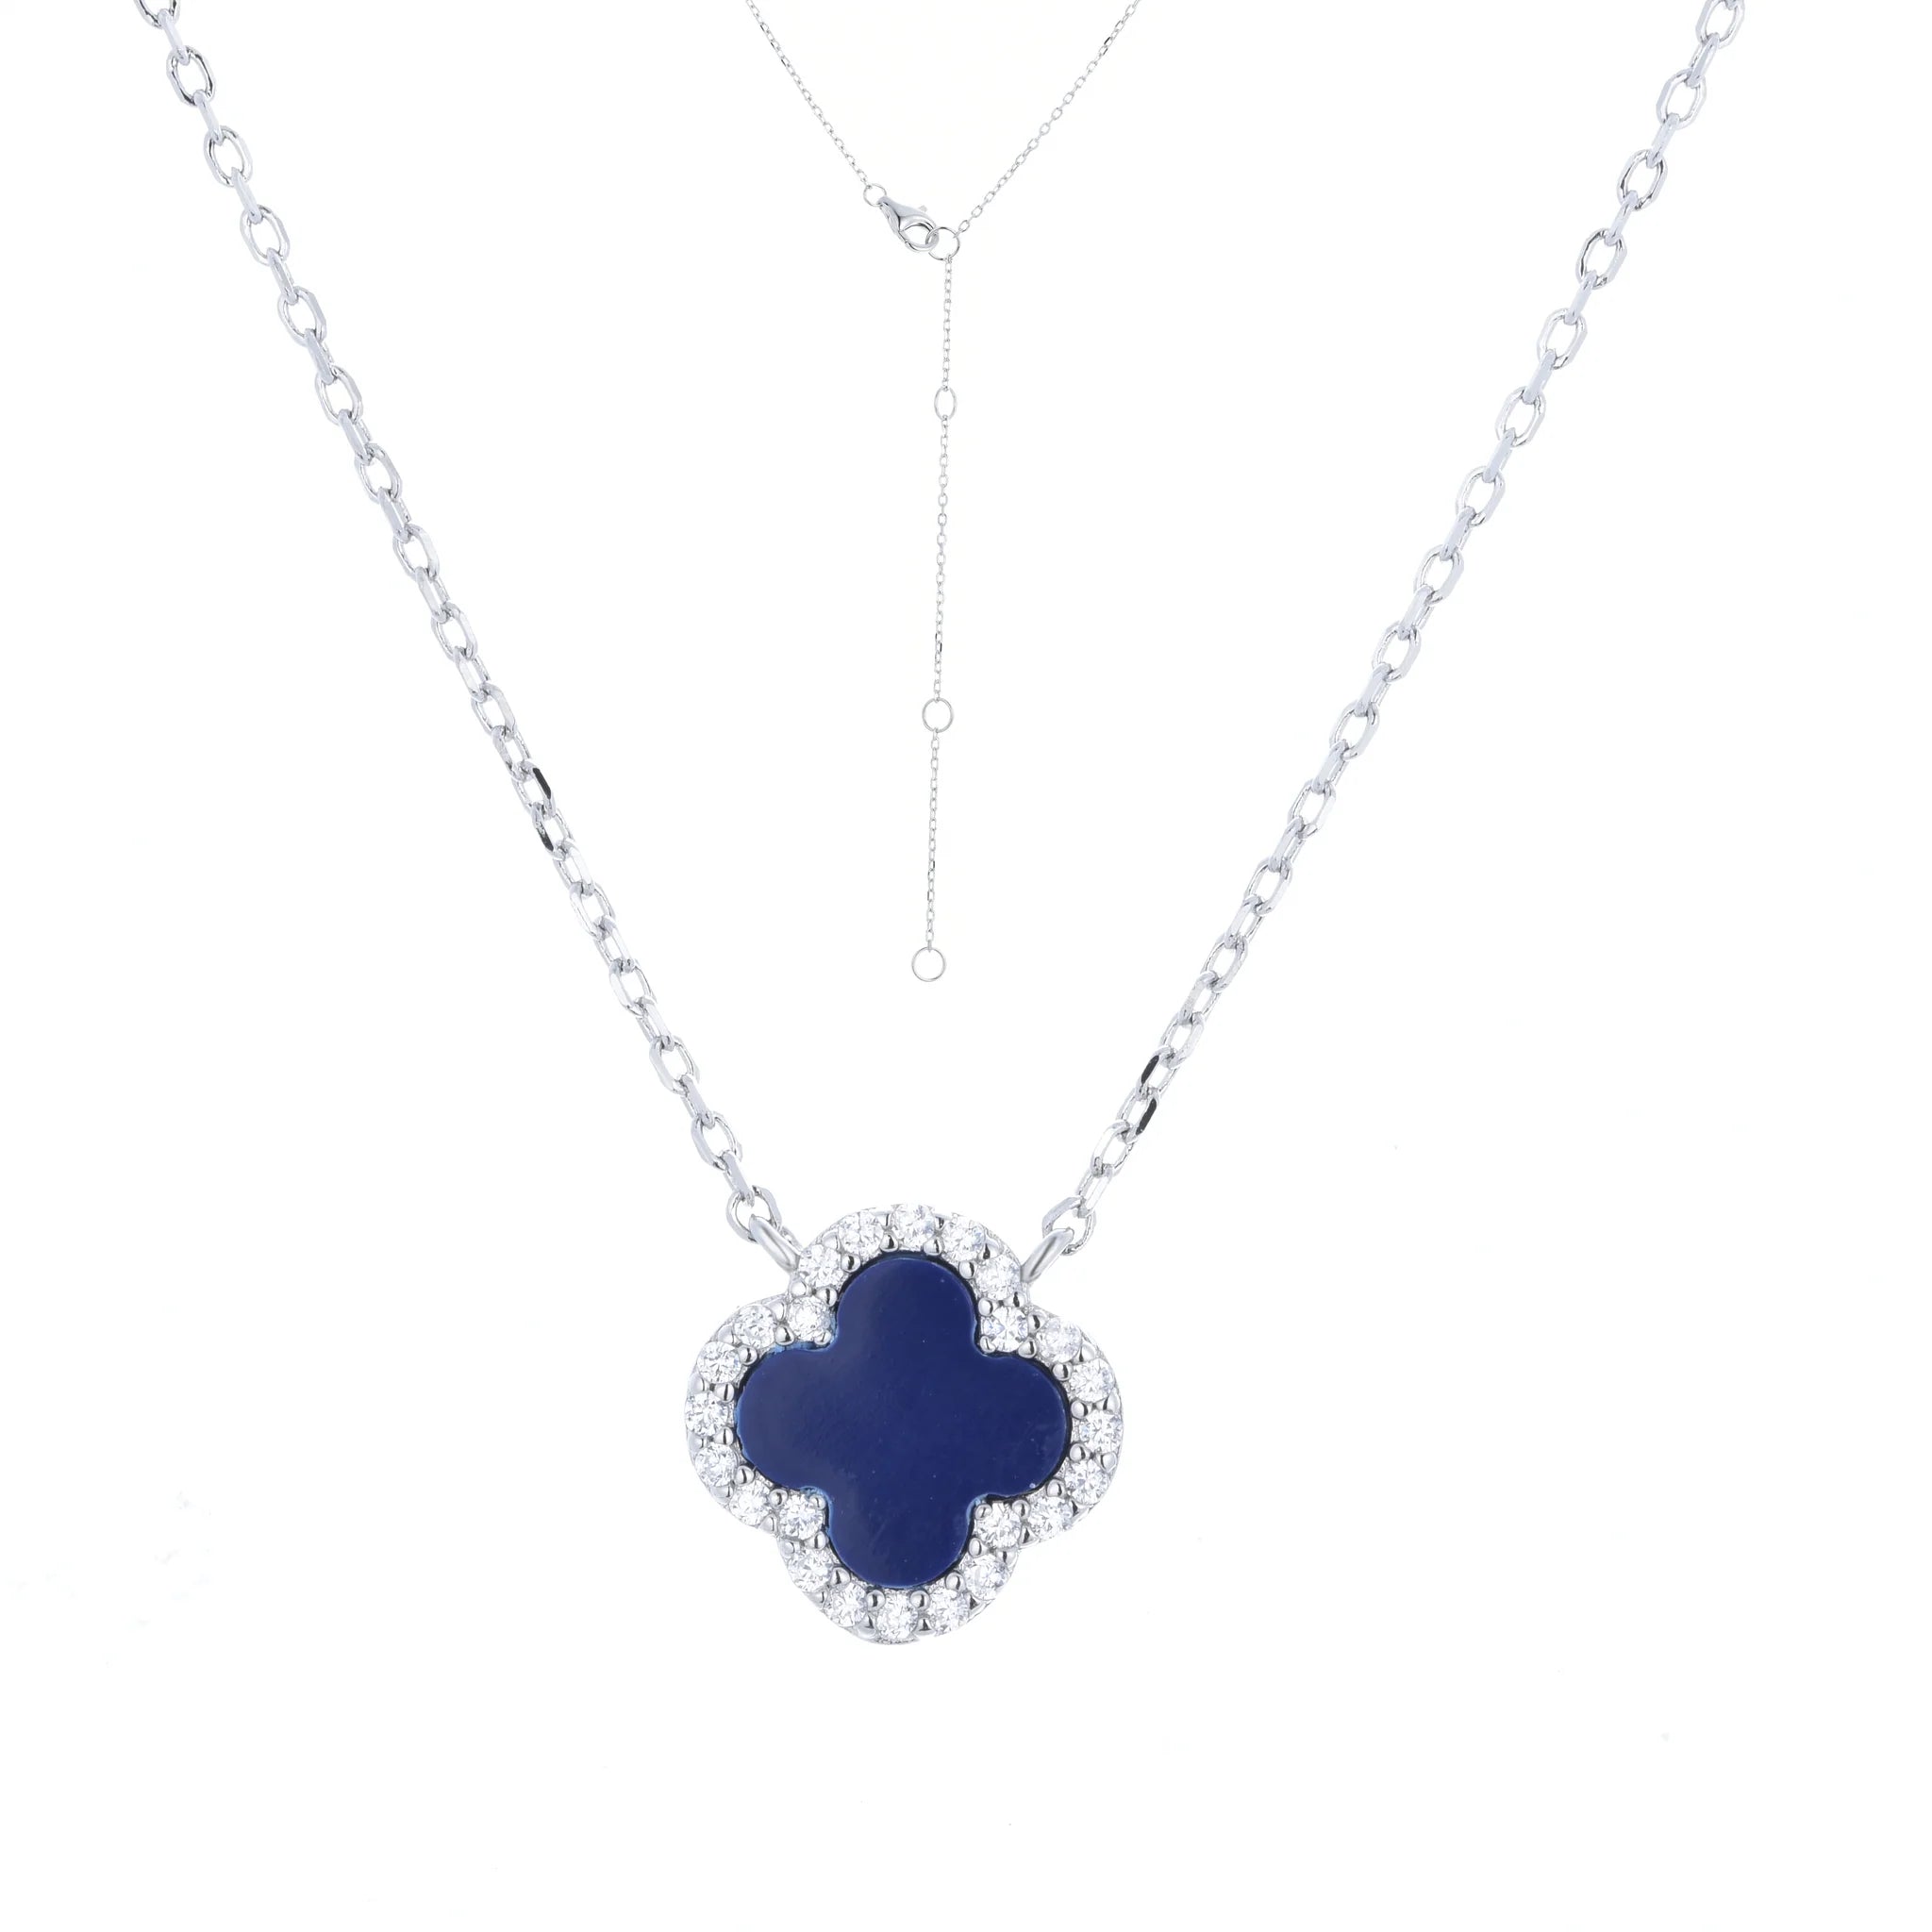 Silver chain necklace with clover pendant with blue lapis stone with CZ stones on the edge